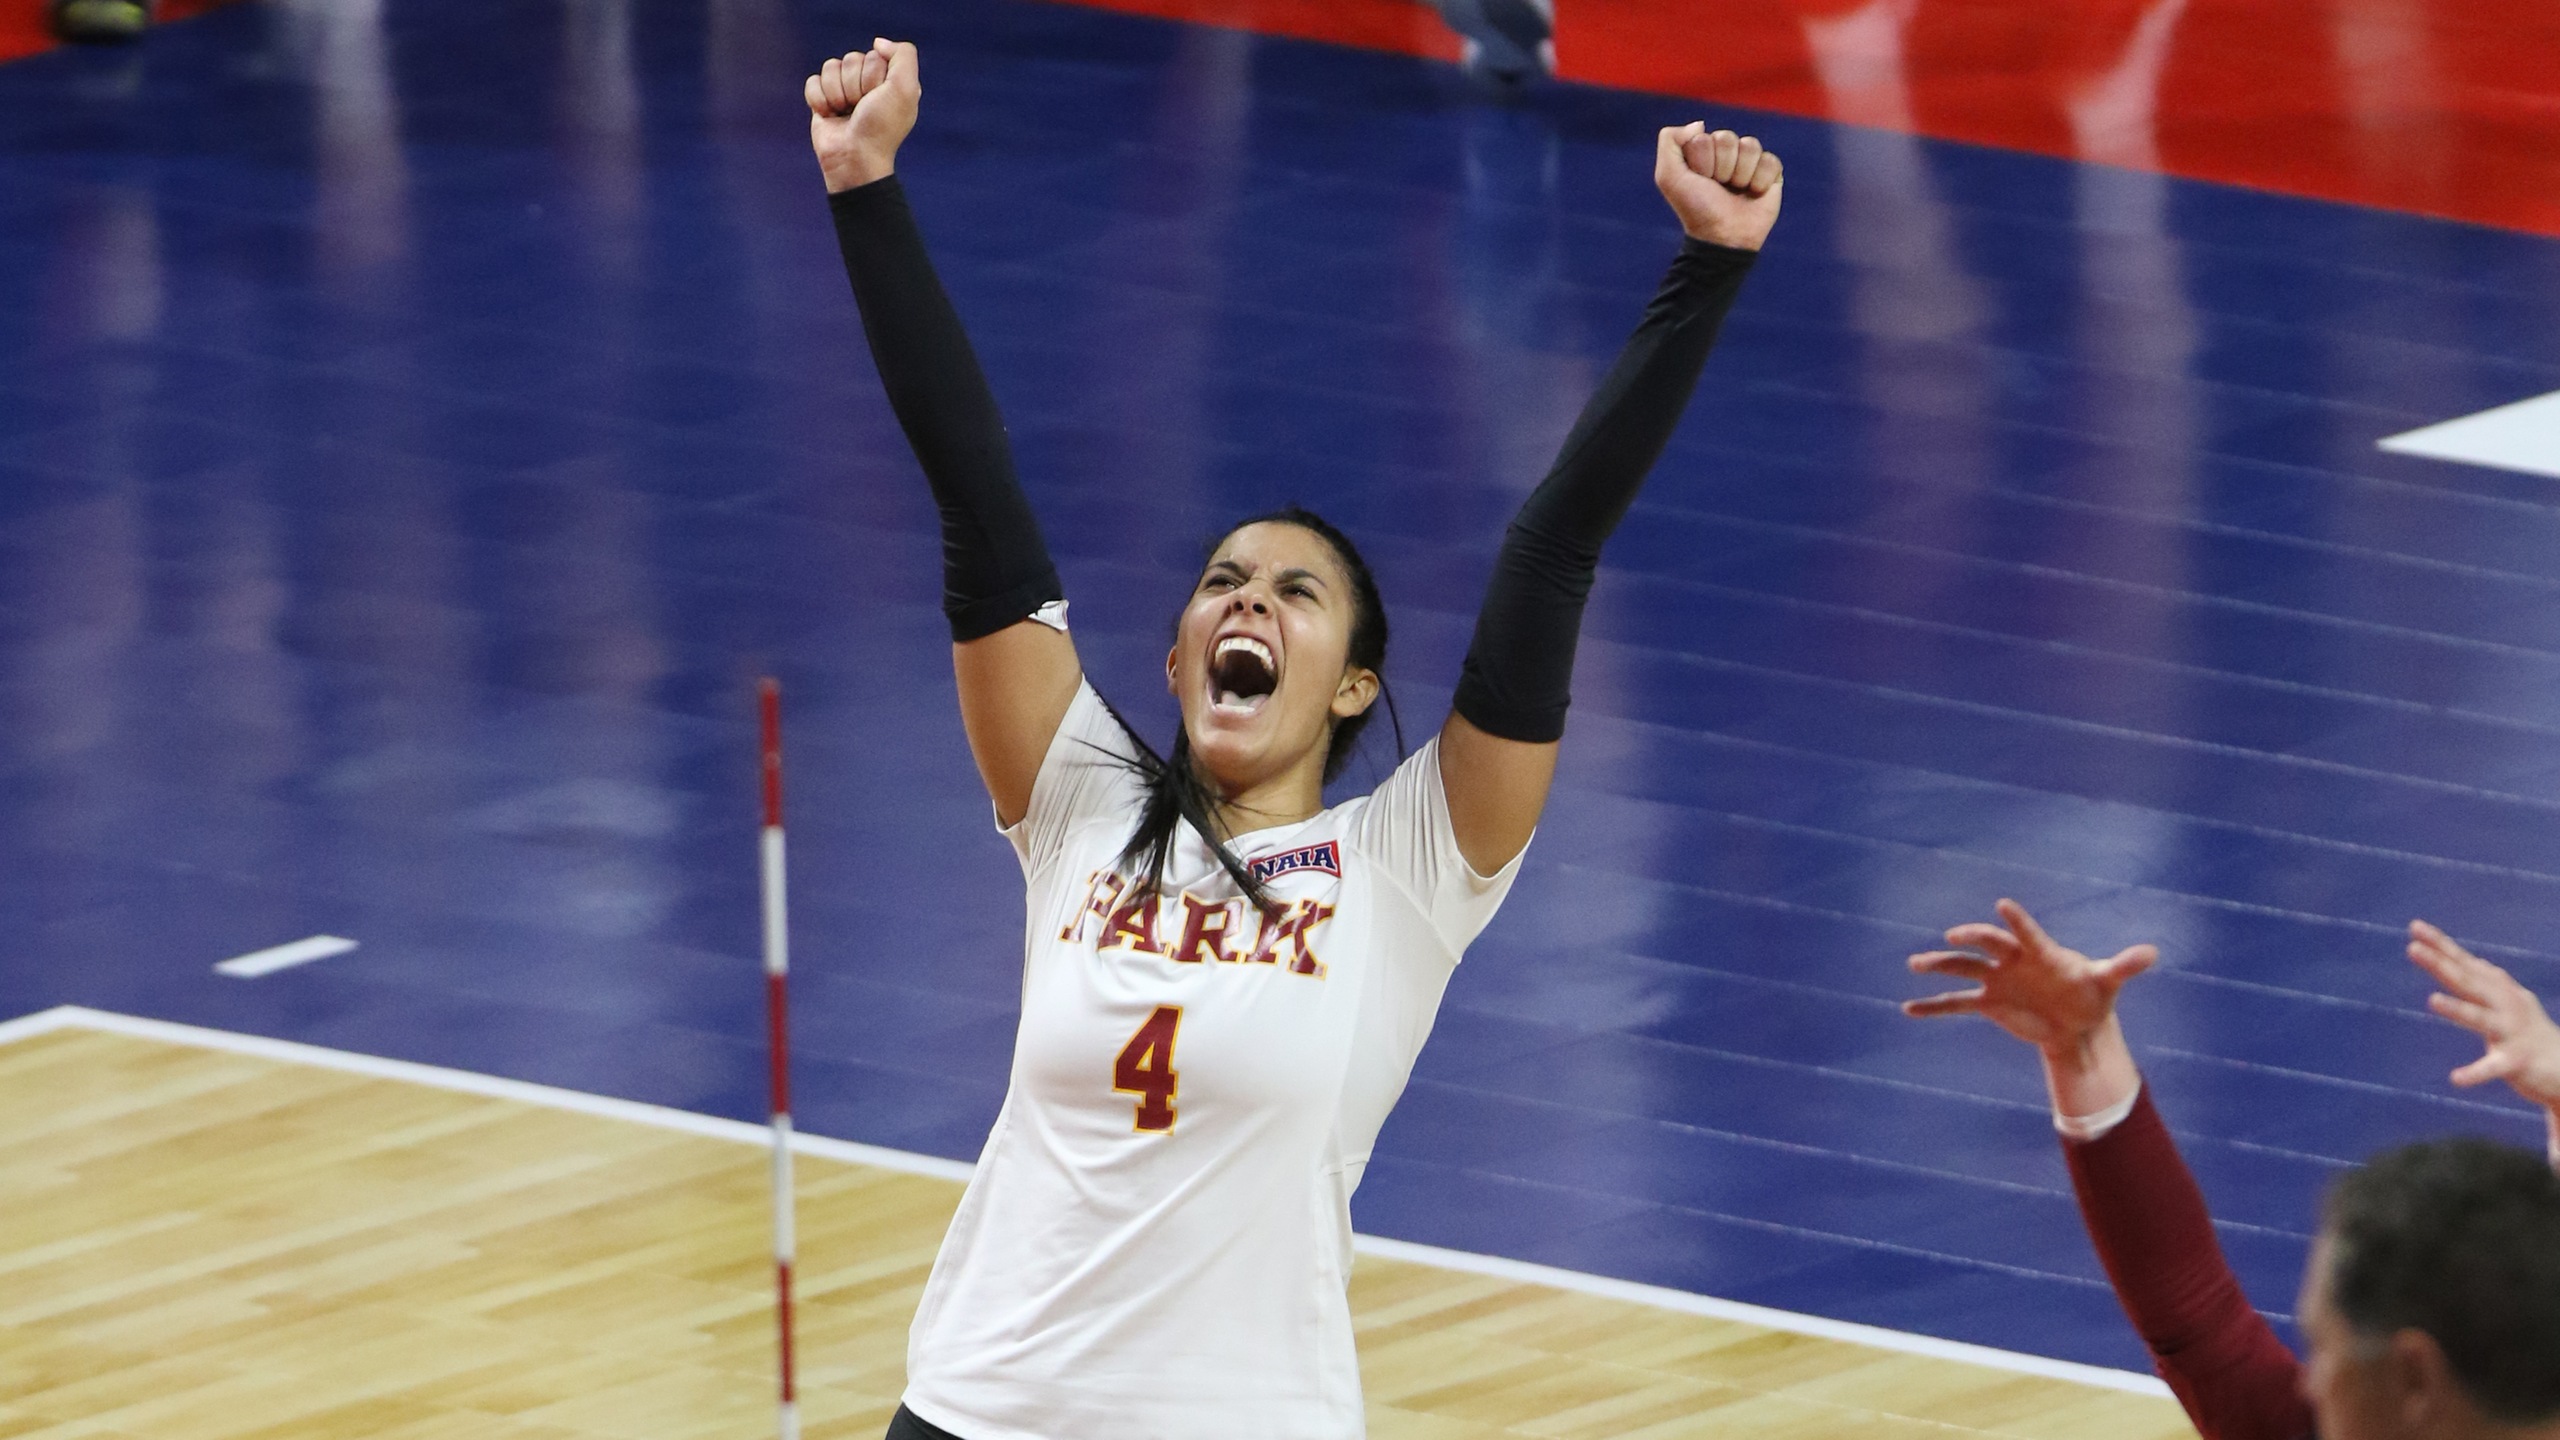 2021 NAIA Women's Volleyball All-Americans and Special Awards